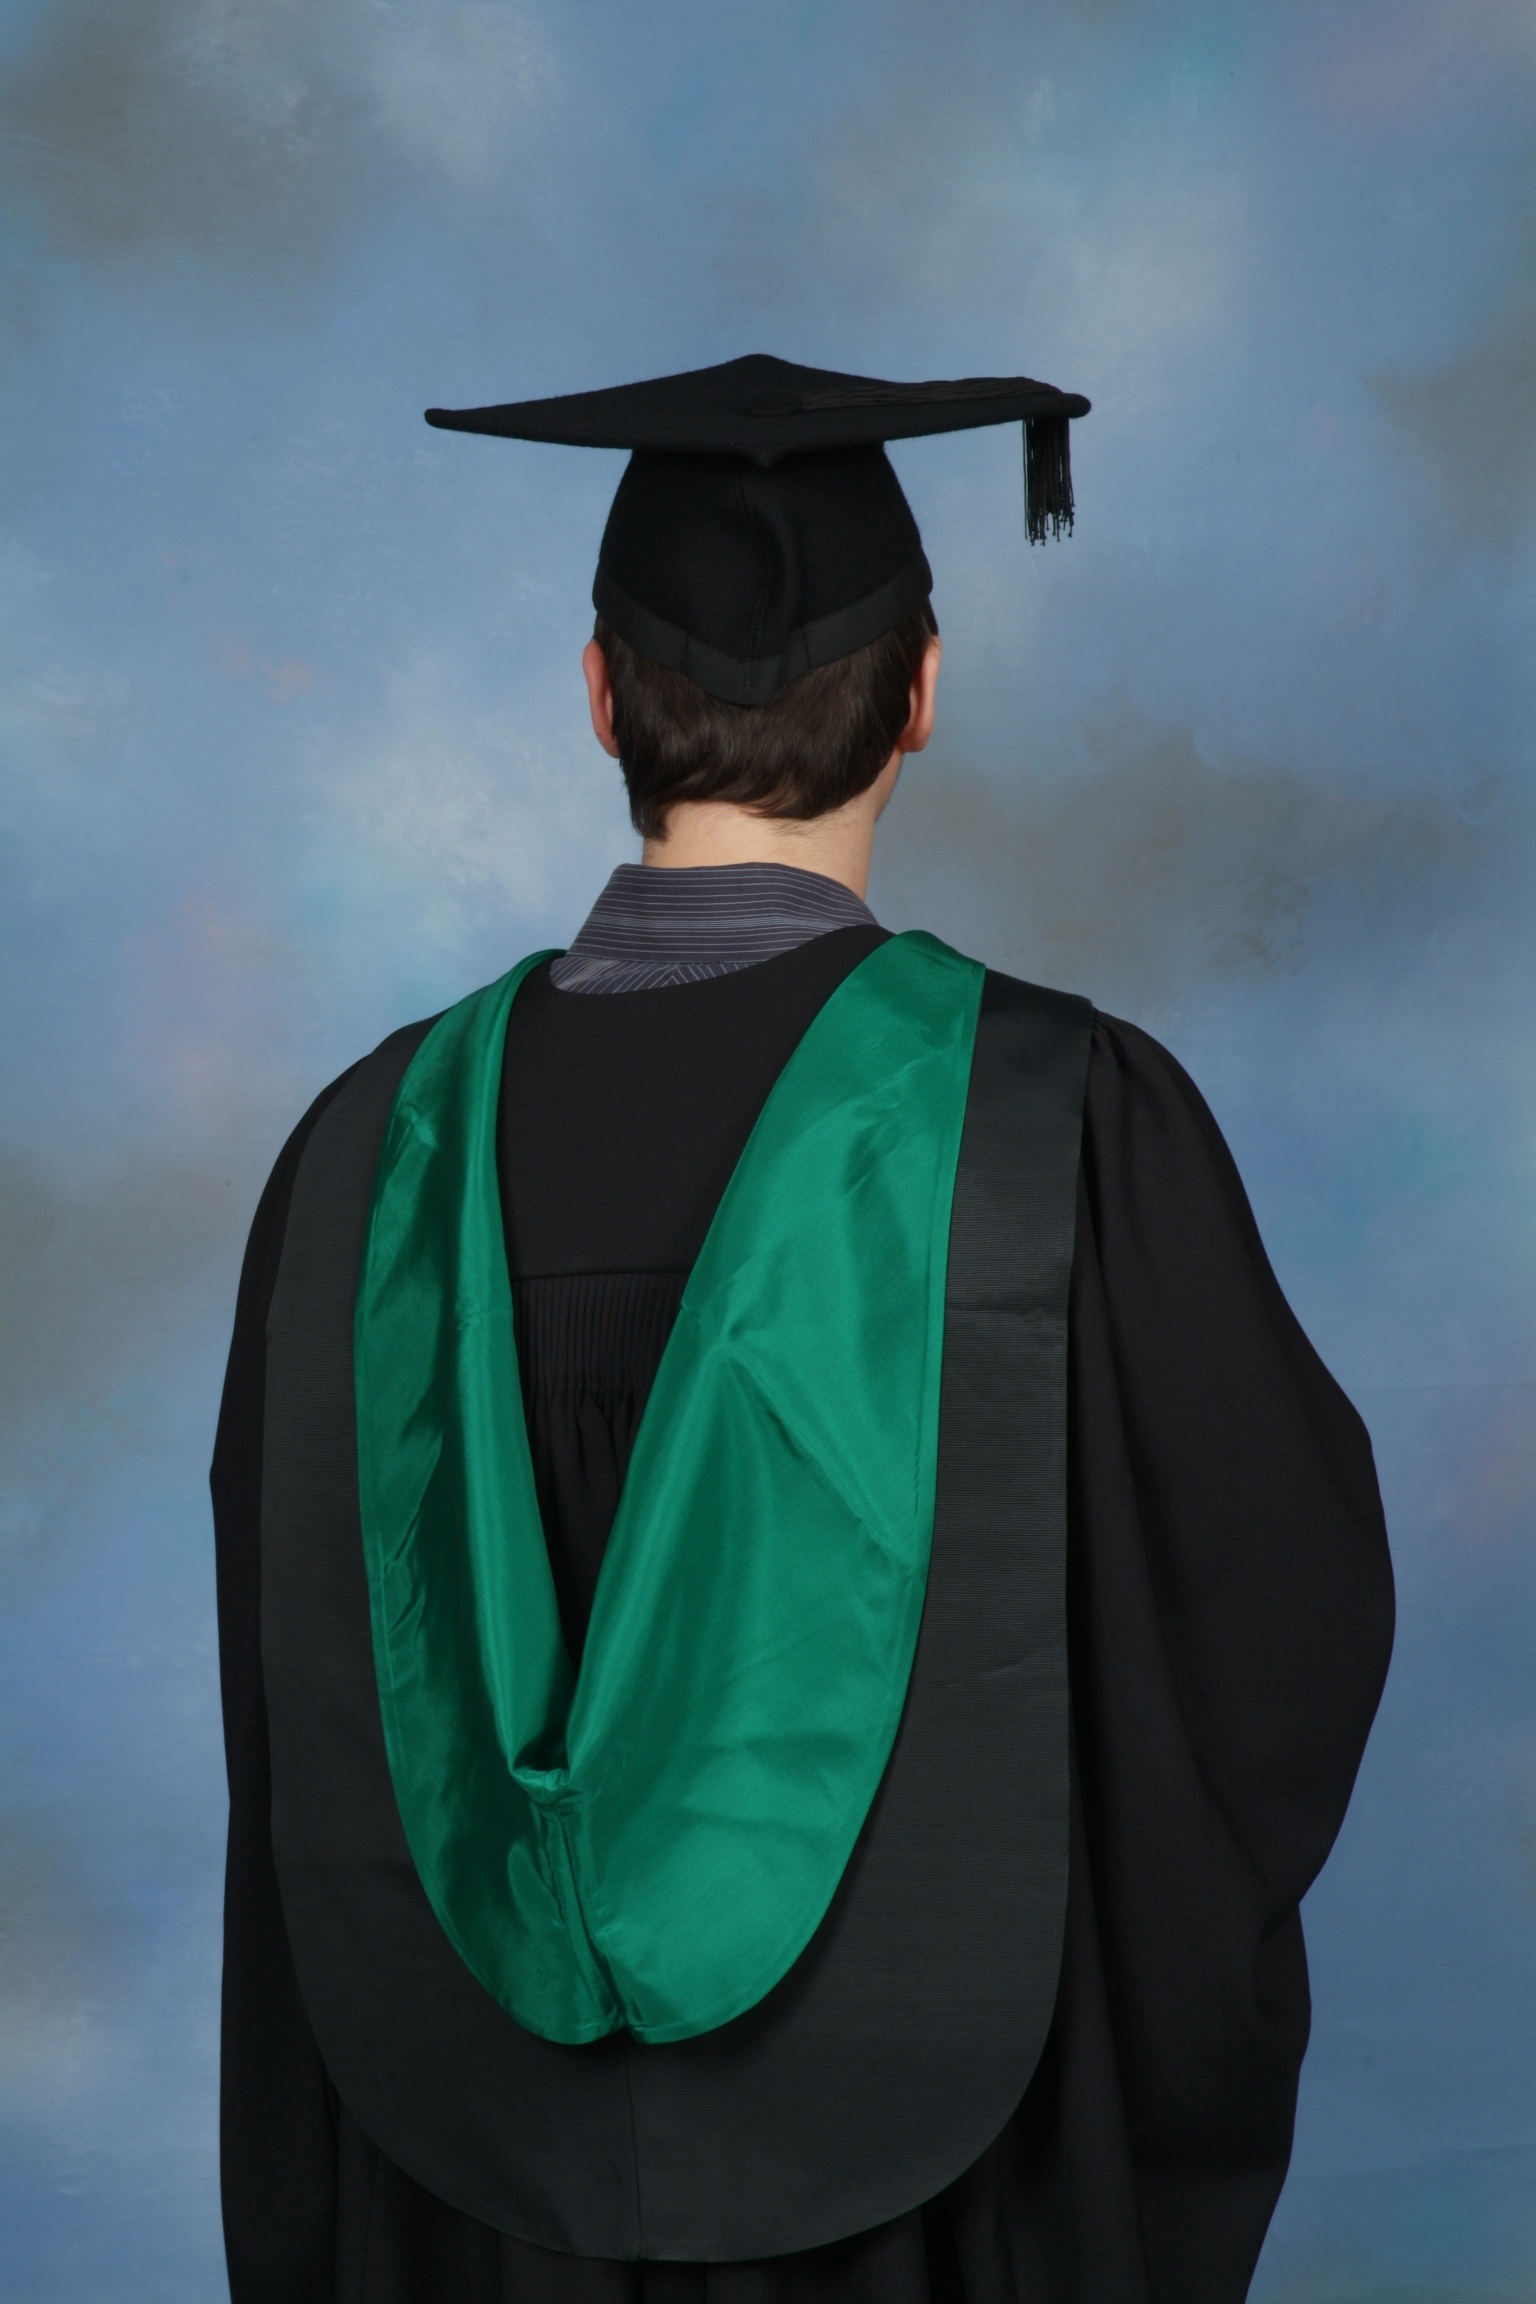 The gown worn by Certificate, Diploma and Foundation Degree graduands.